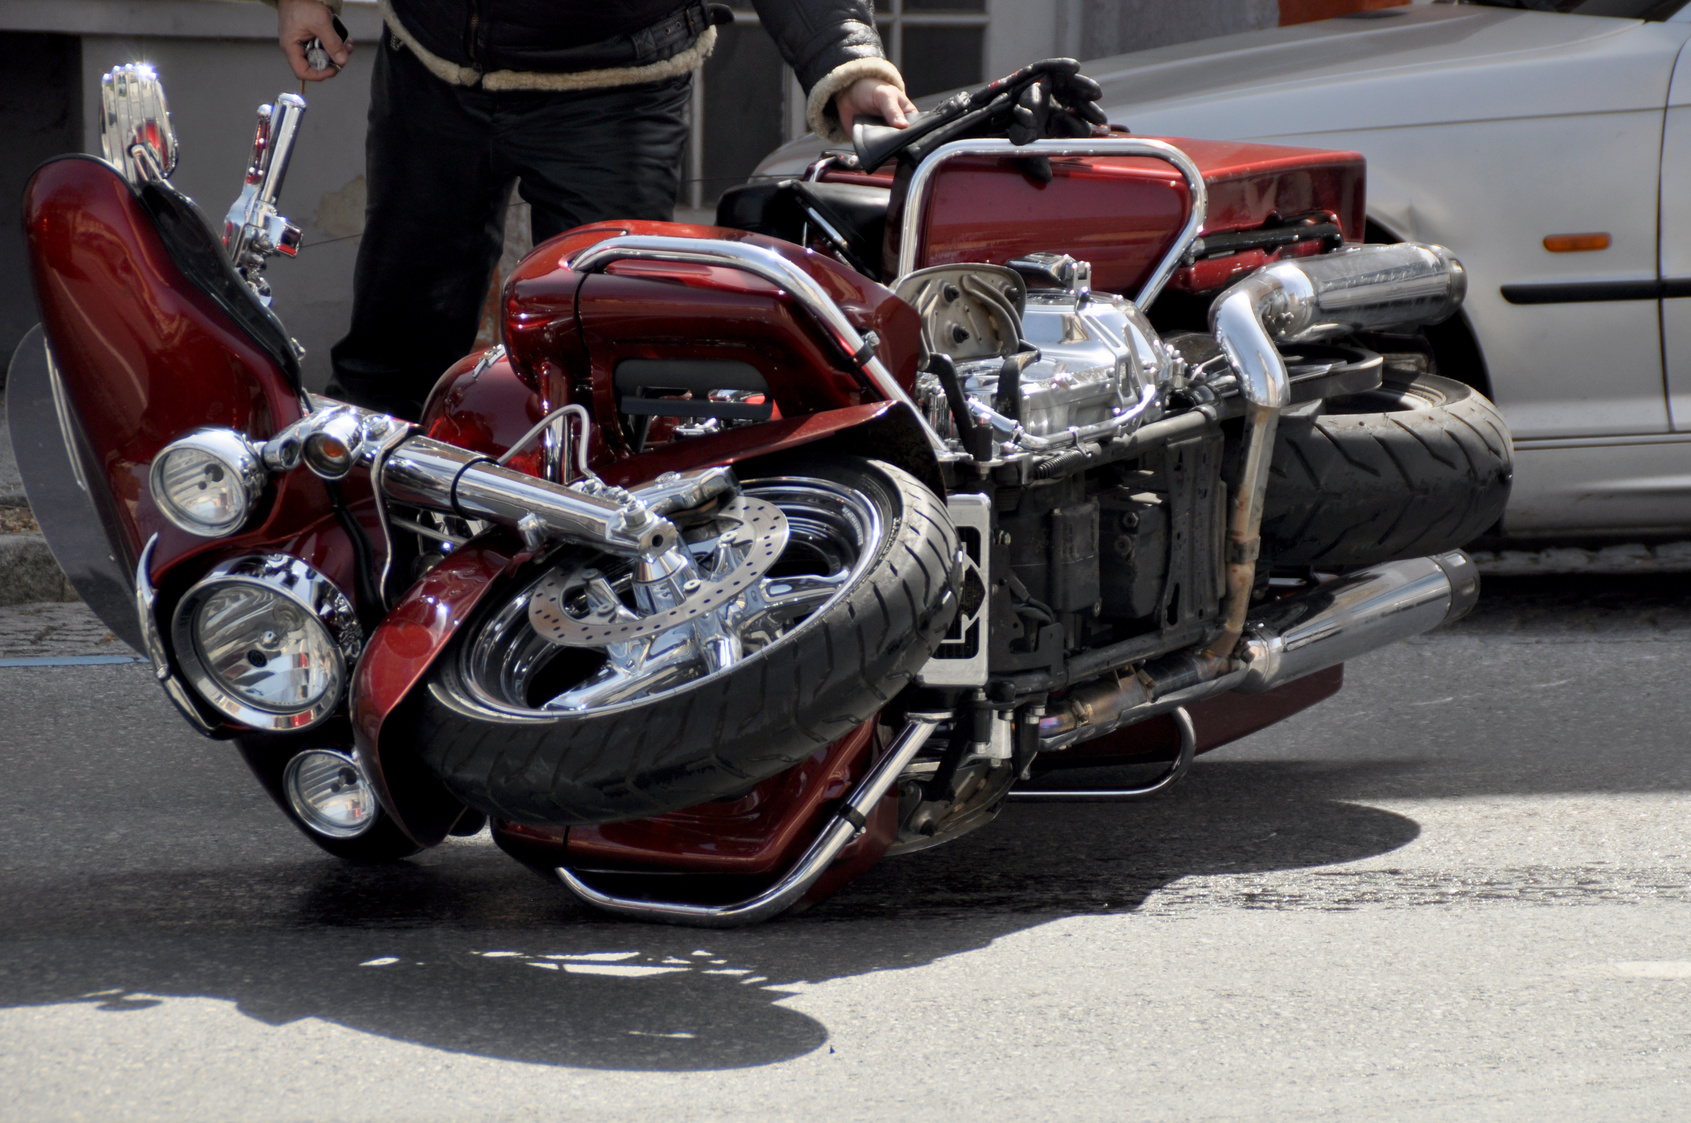 Find Medical Attention After a Motorcycle Crash